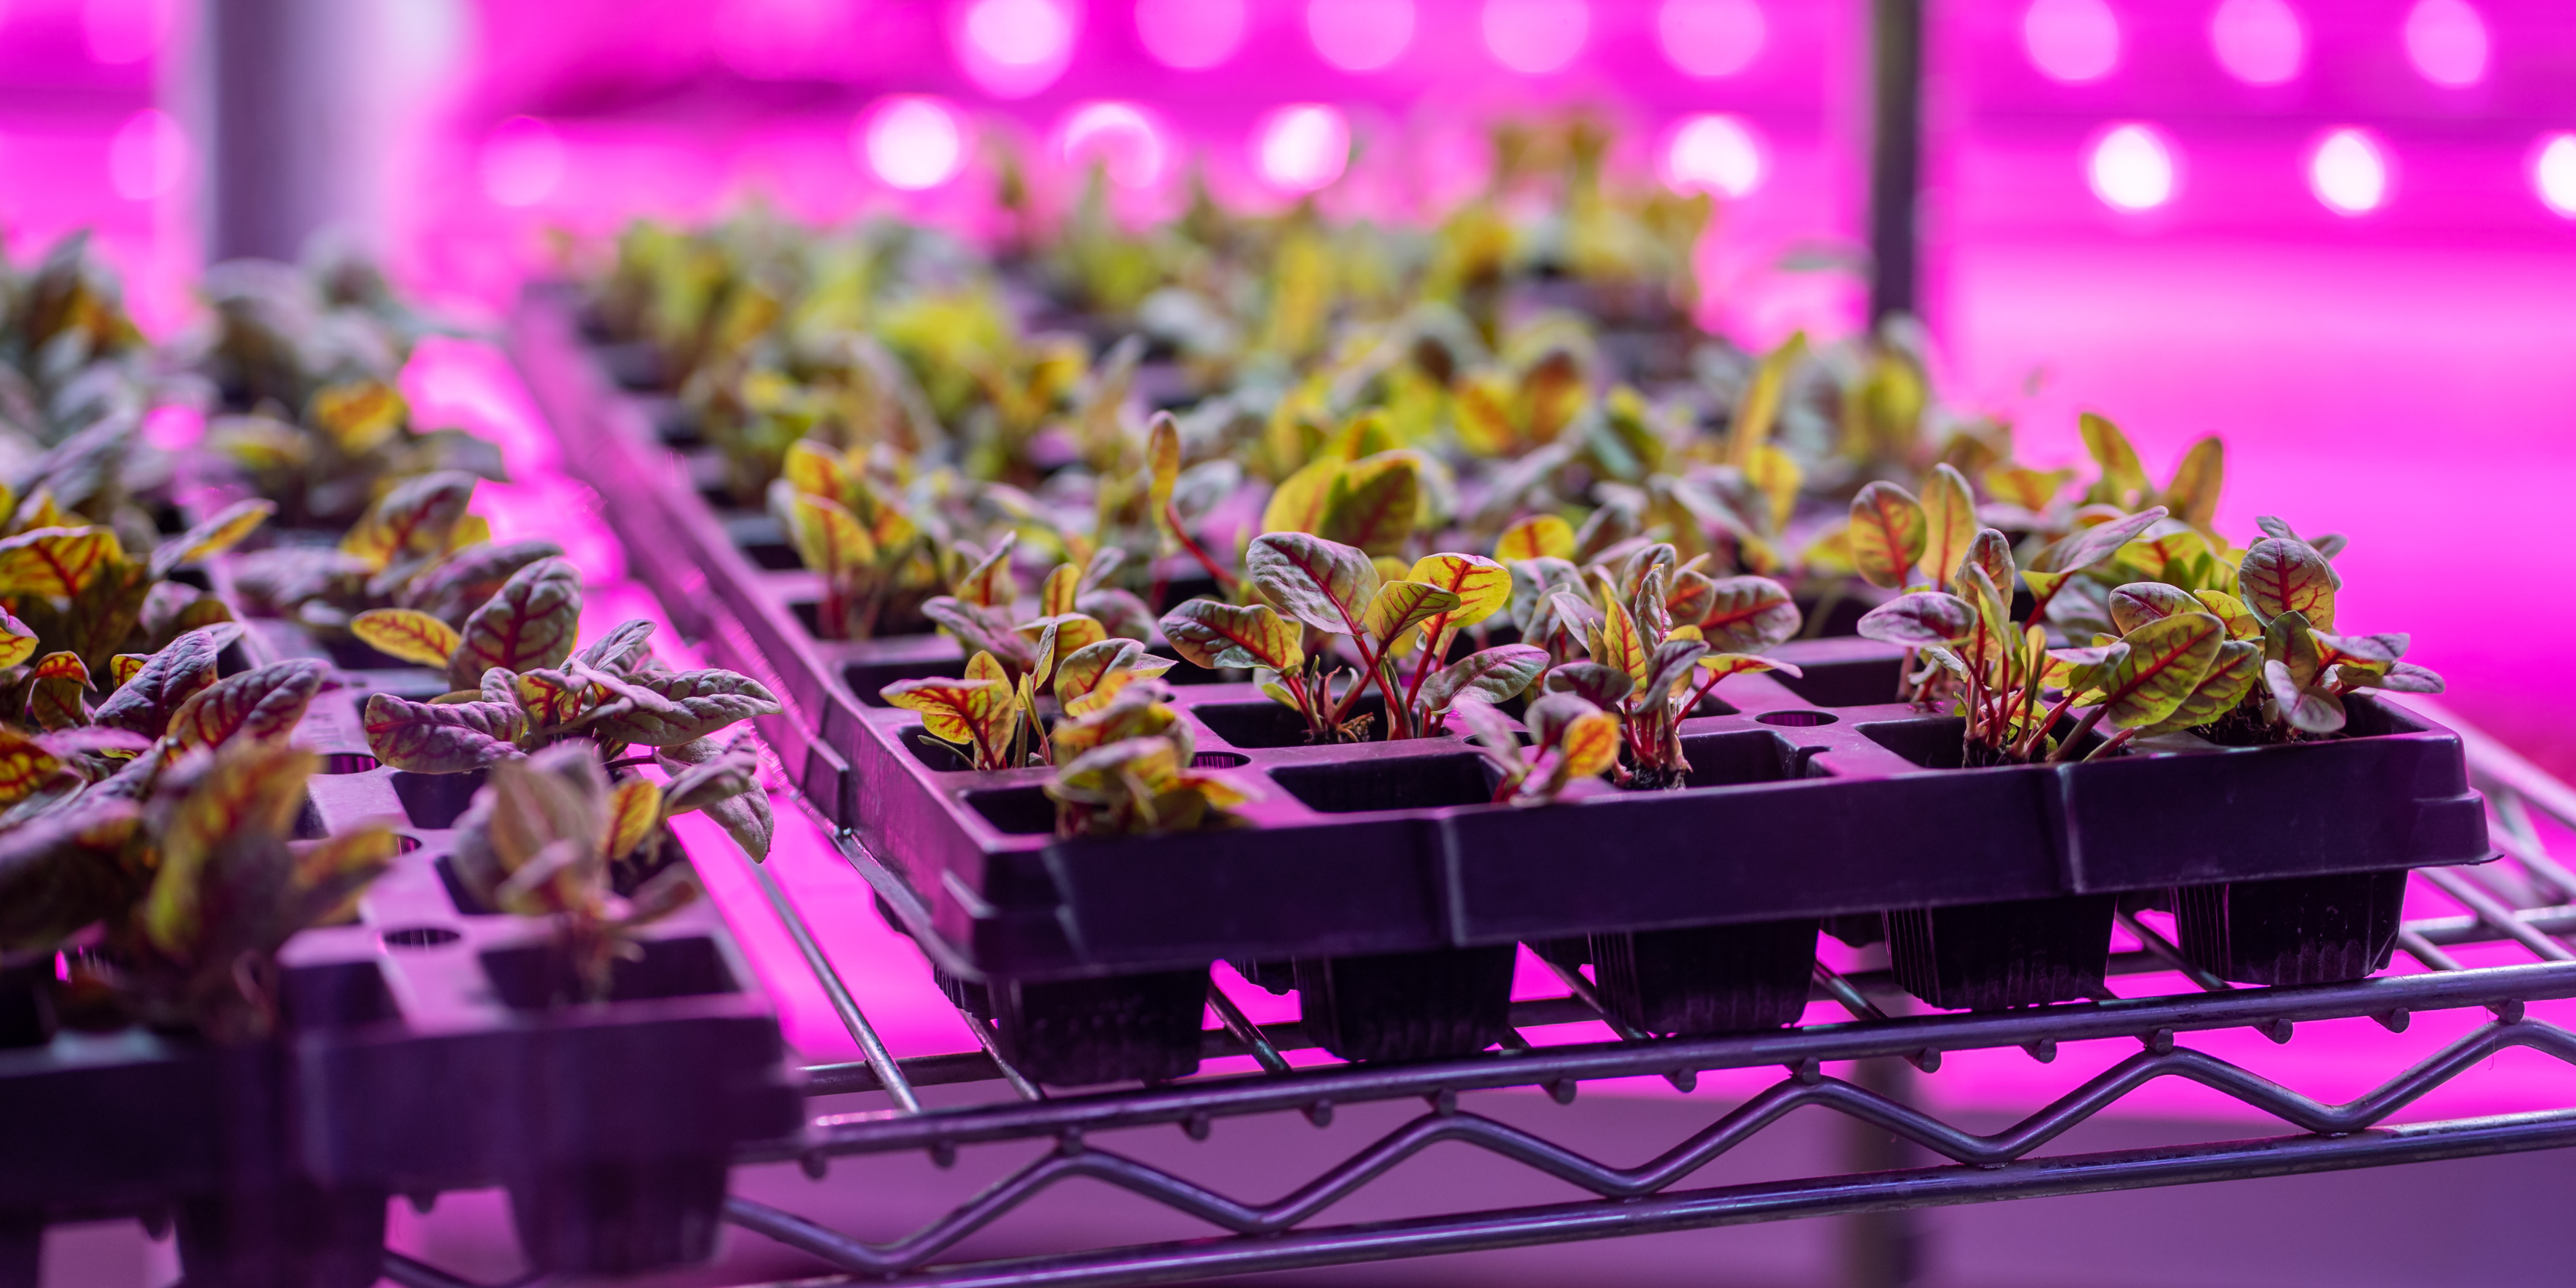 The future of agtech: sensors, vertical farming, and cows